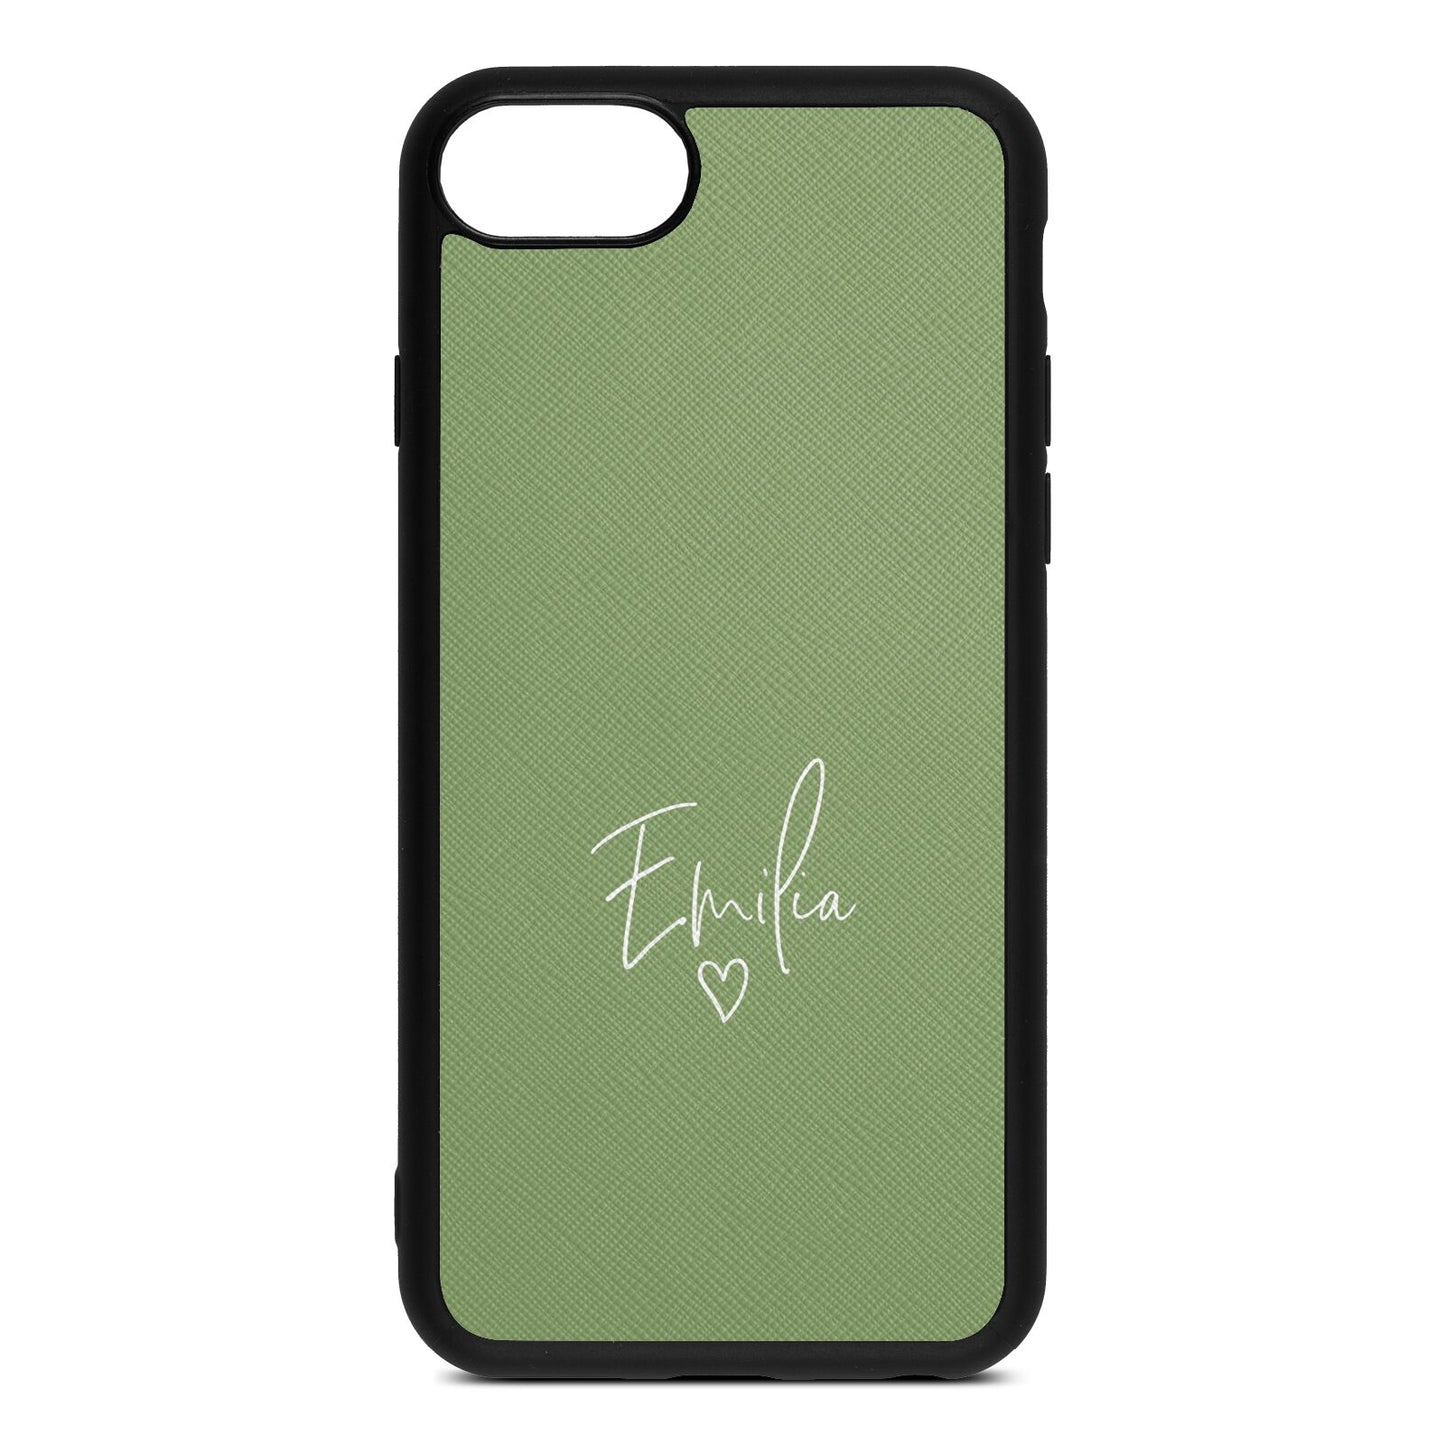 White Handwritten Name Transparent Lime Saffiano Leather iPhone 8 Case